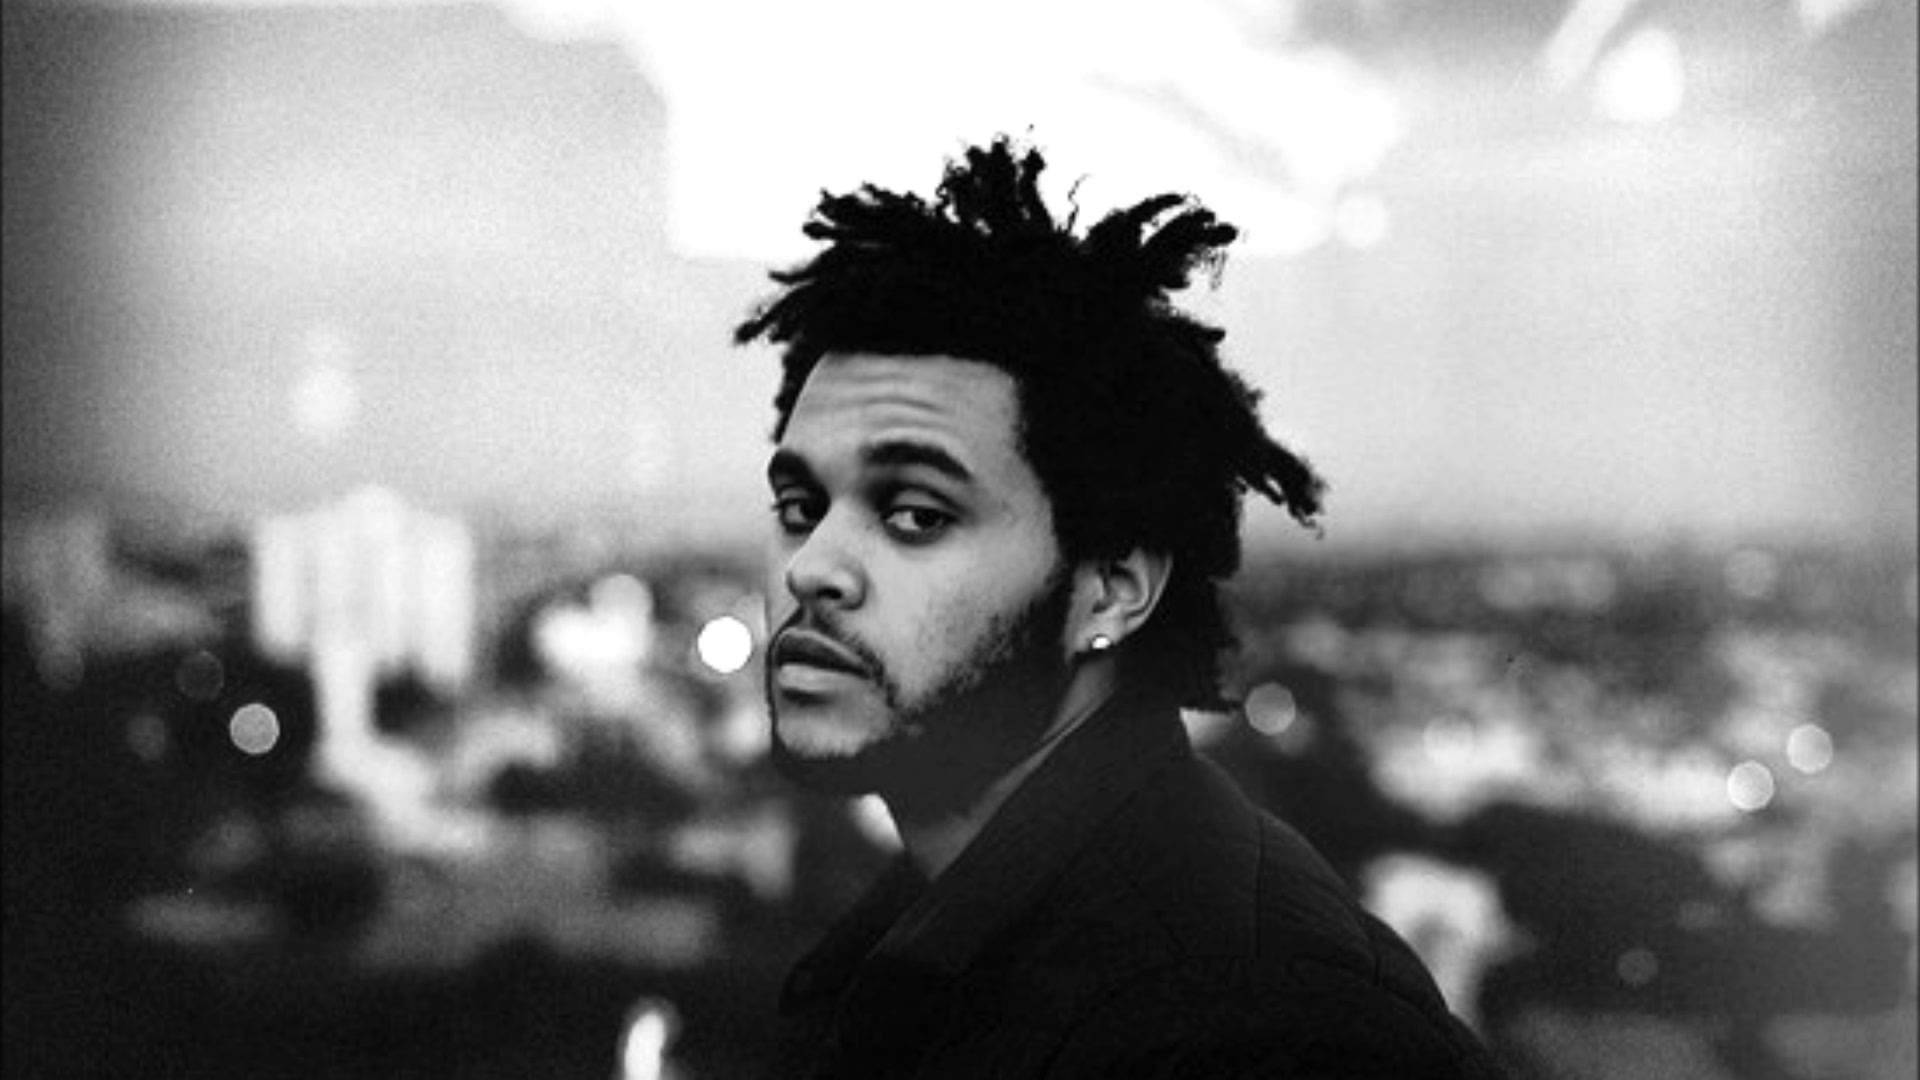 Nice Images Collection: The Weeknd Desktop Wallpapers